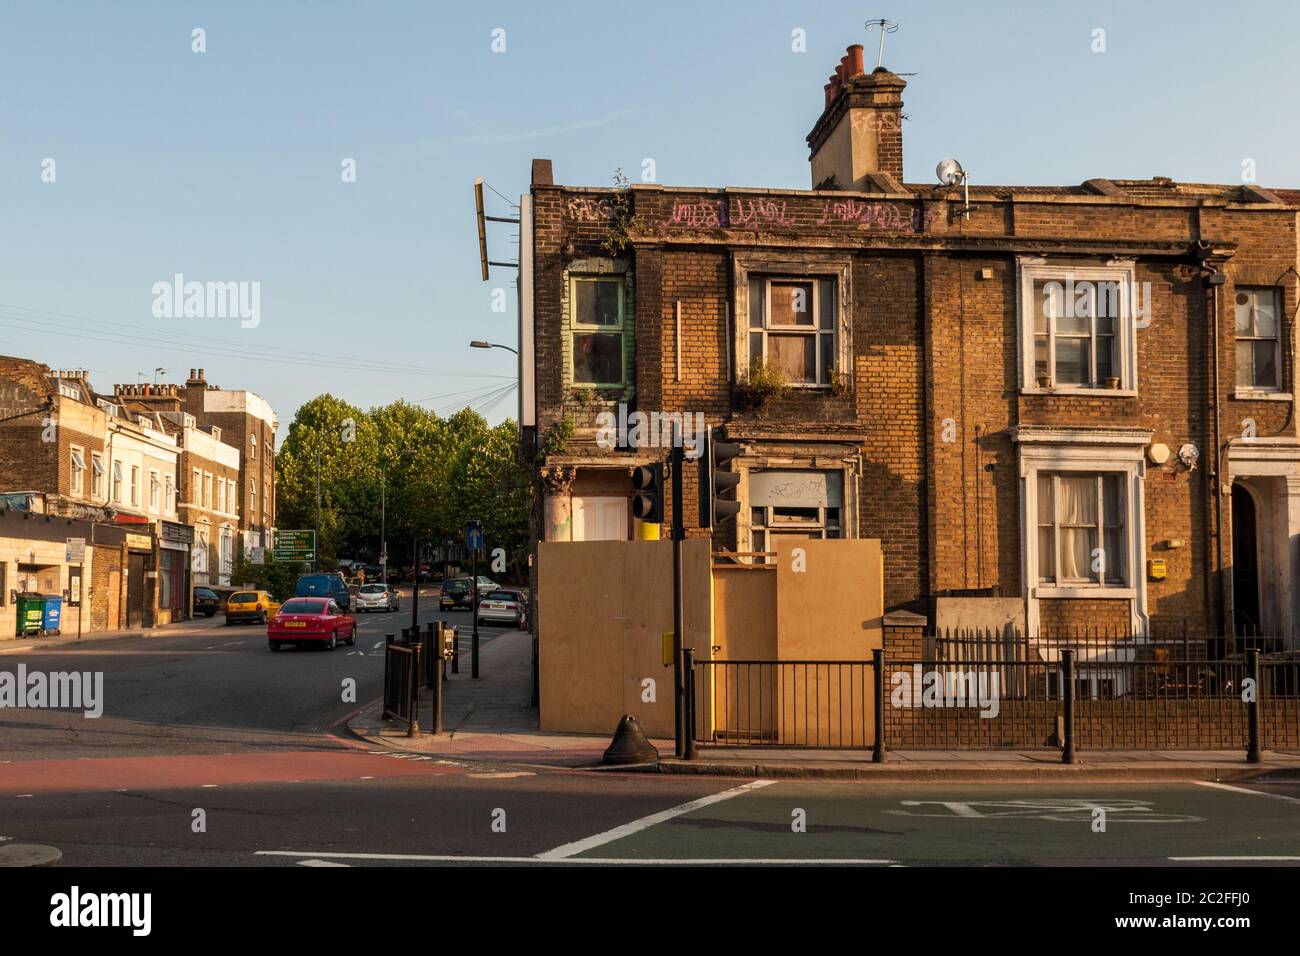 London, England, UK - June 28, 2010: A derelict house stands boarded up on the New Cross Road in South East London following the 'credit crisis' reces Stock Photo